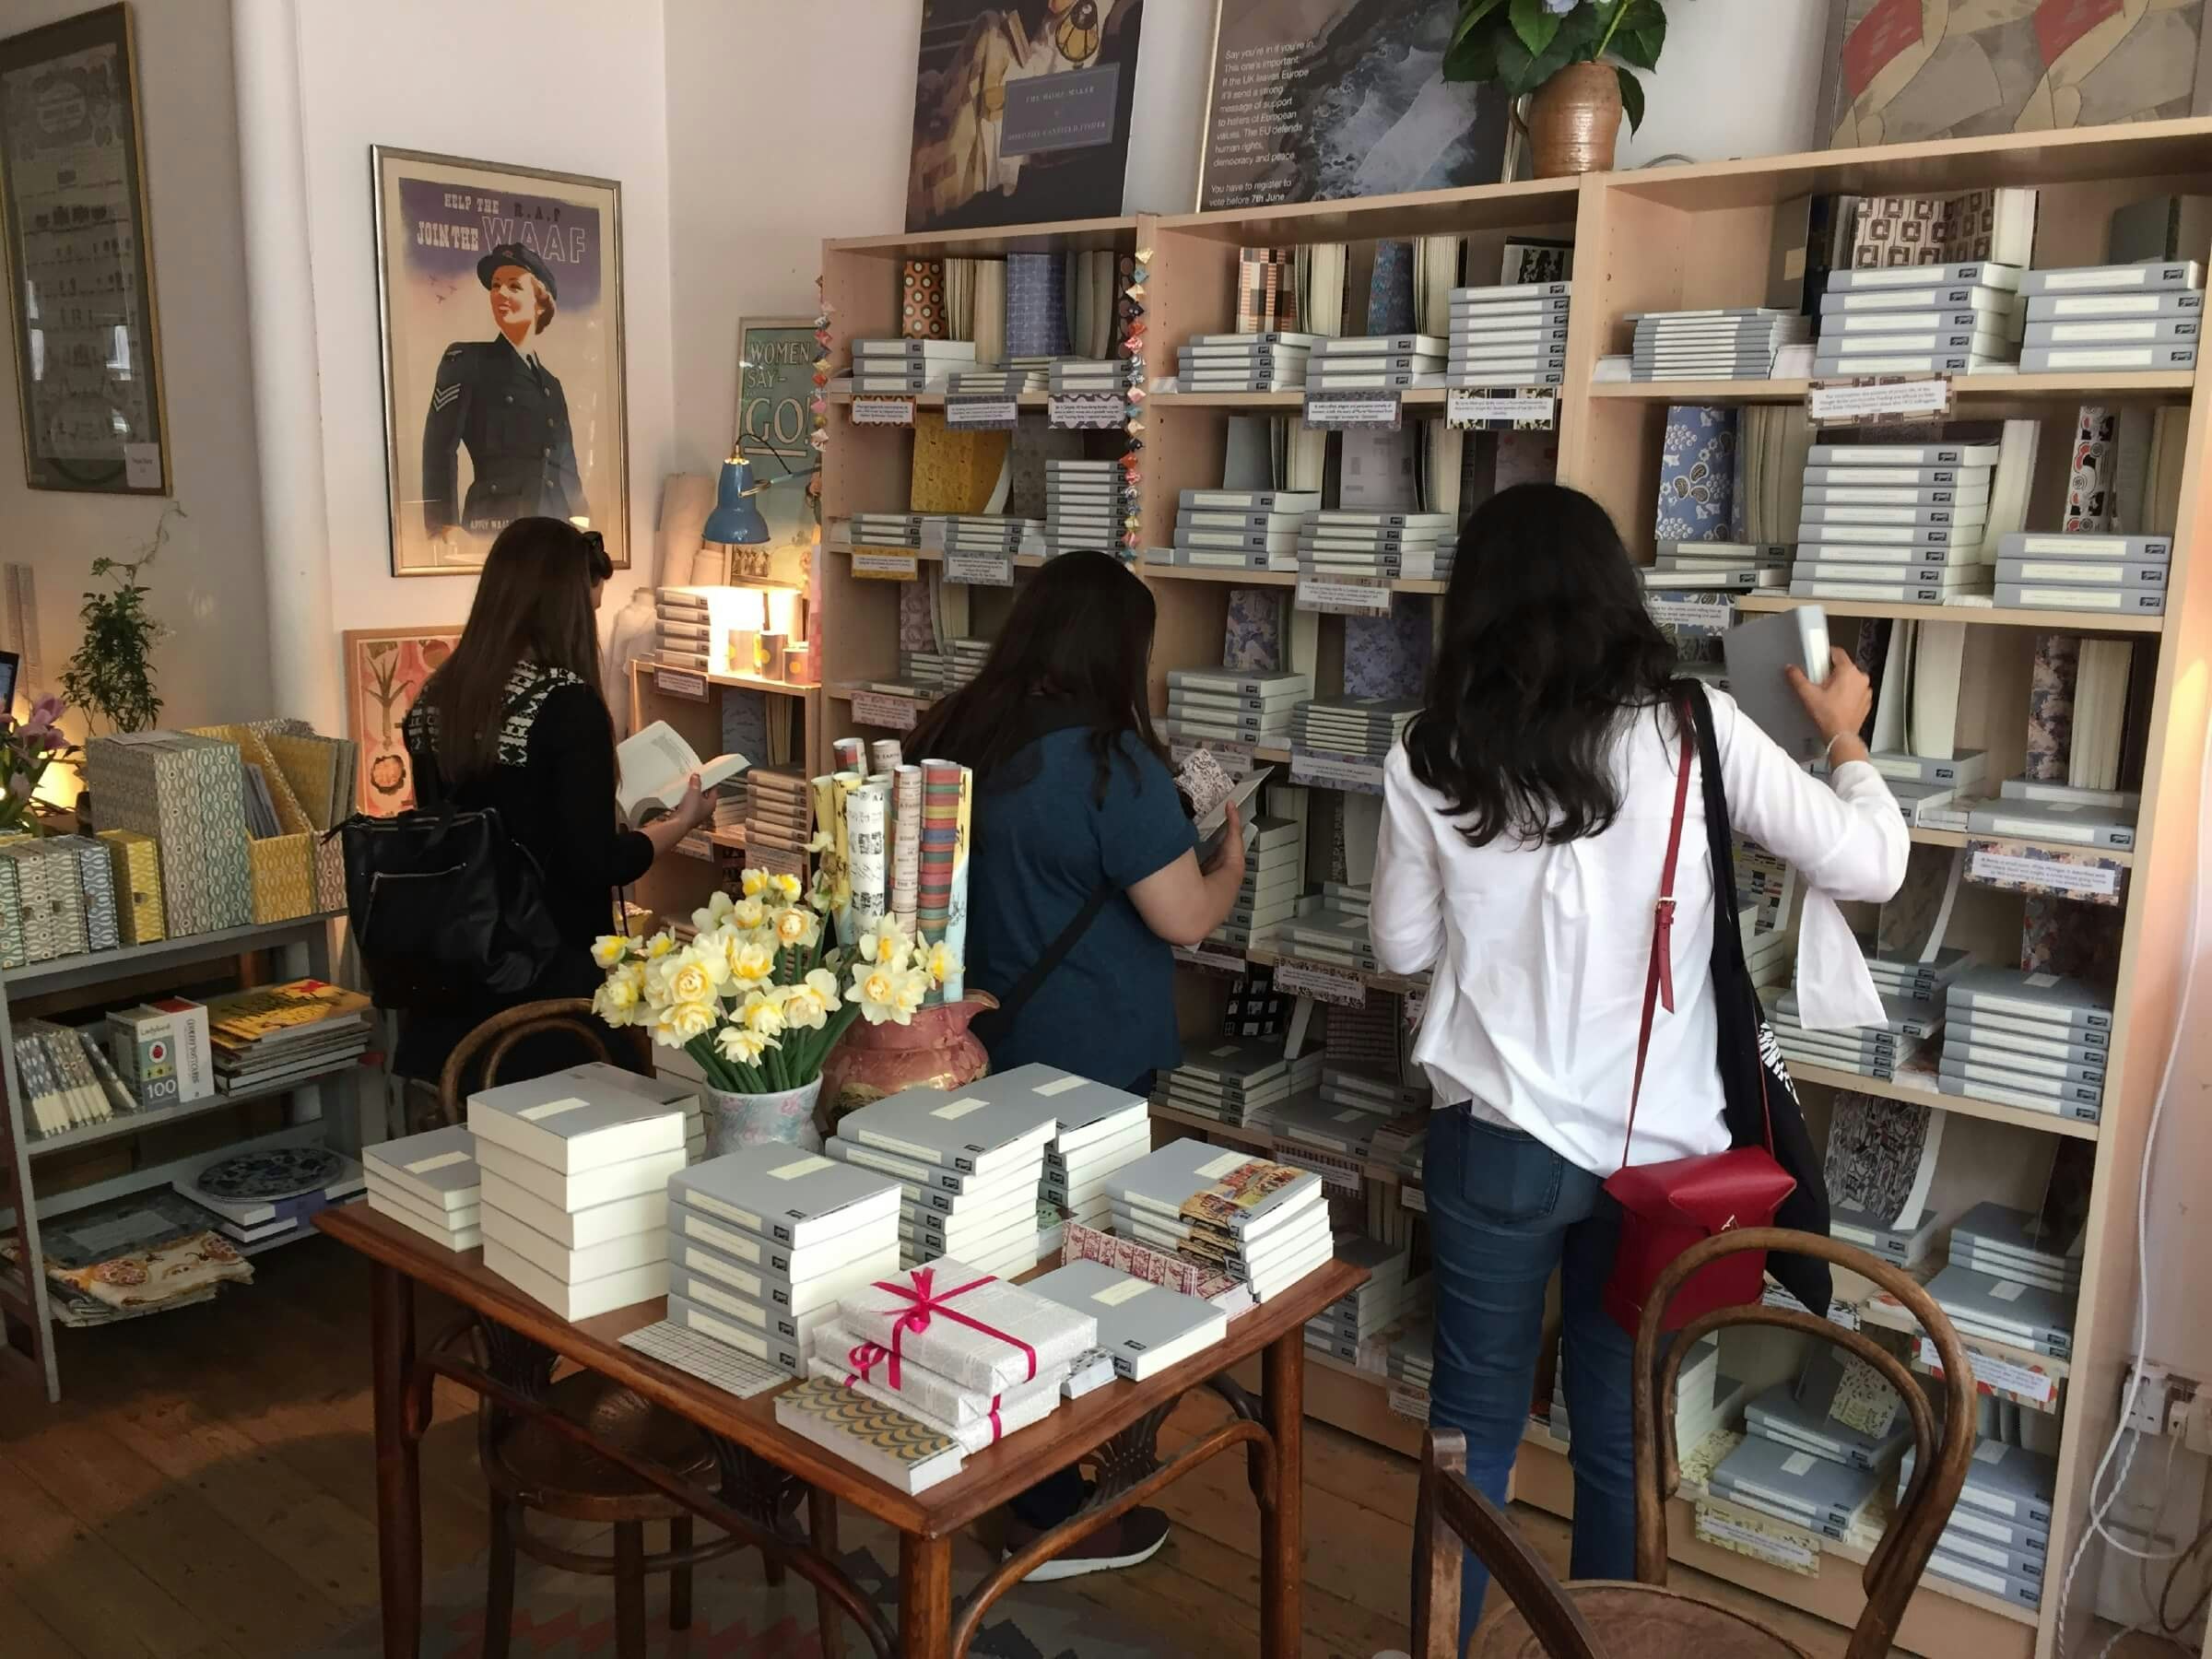 The interior of Persephone Books. Three women browse the book shelves filled with stacks of grey books.